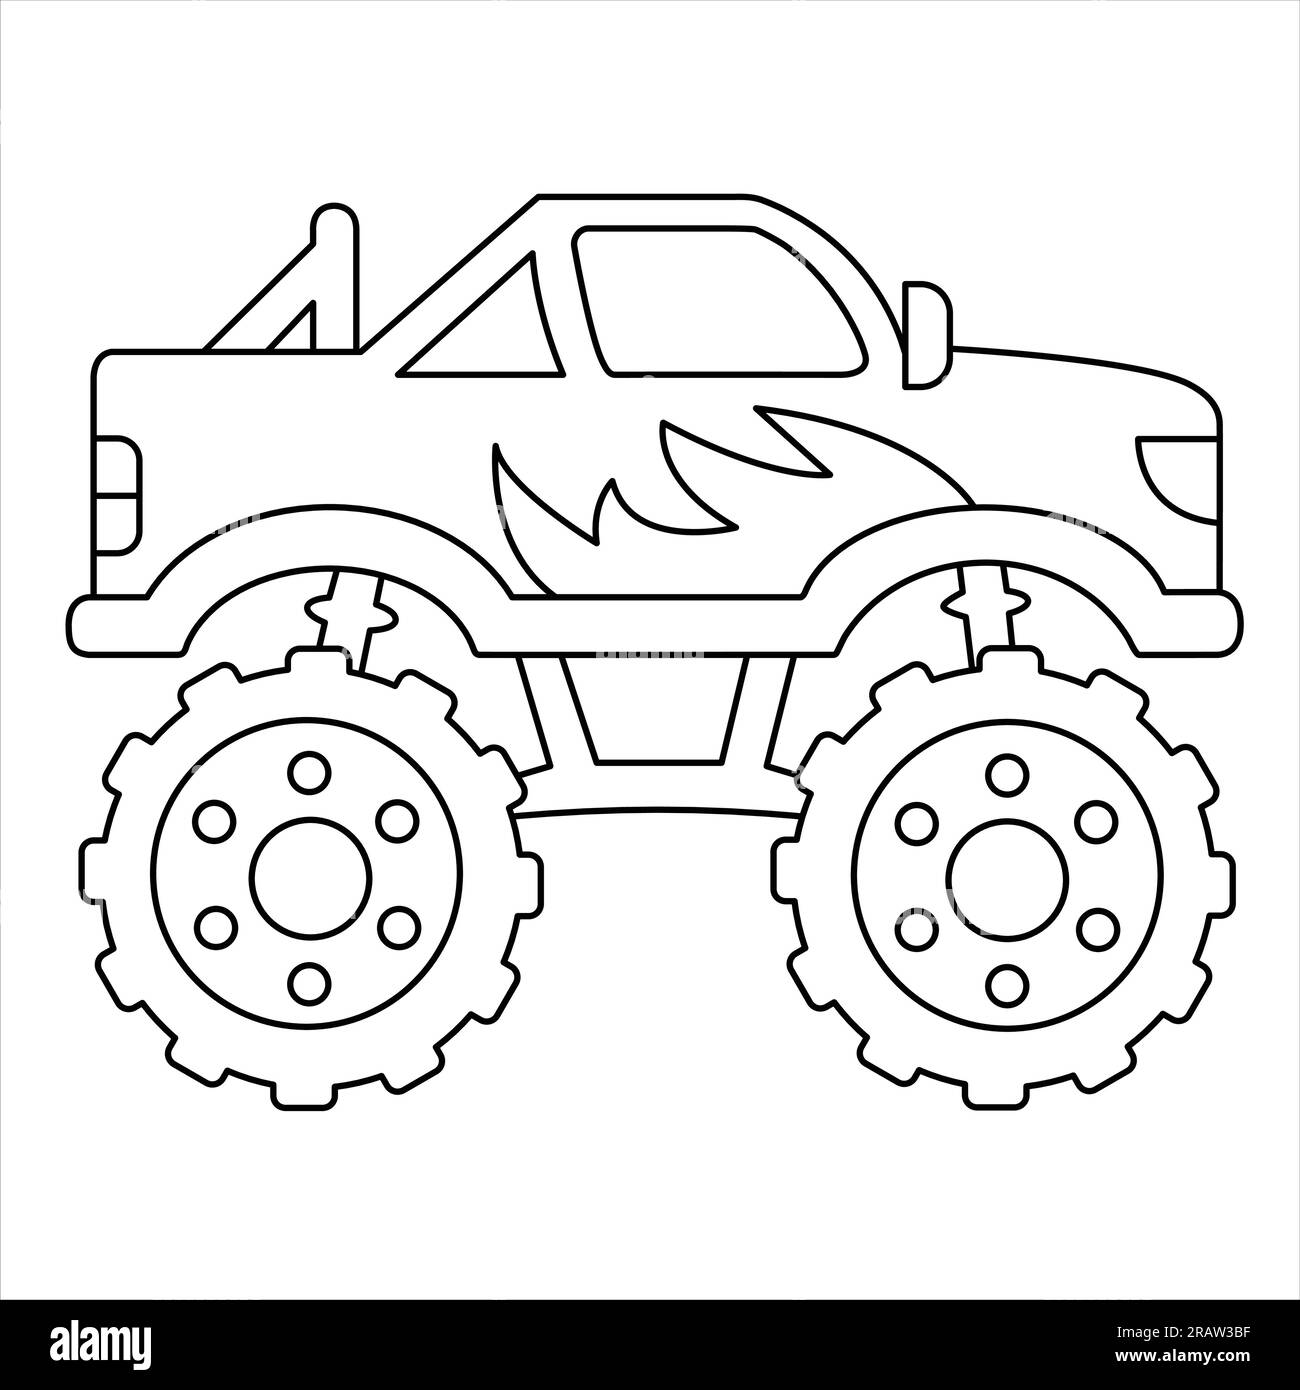 Vehicle Coloring book: Kids Coloring Books with Monster Trucks, Fire  Trucks, Dump Trucks, Garbage Trucks - Vehicles coloring pages for kids and  girls